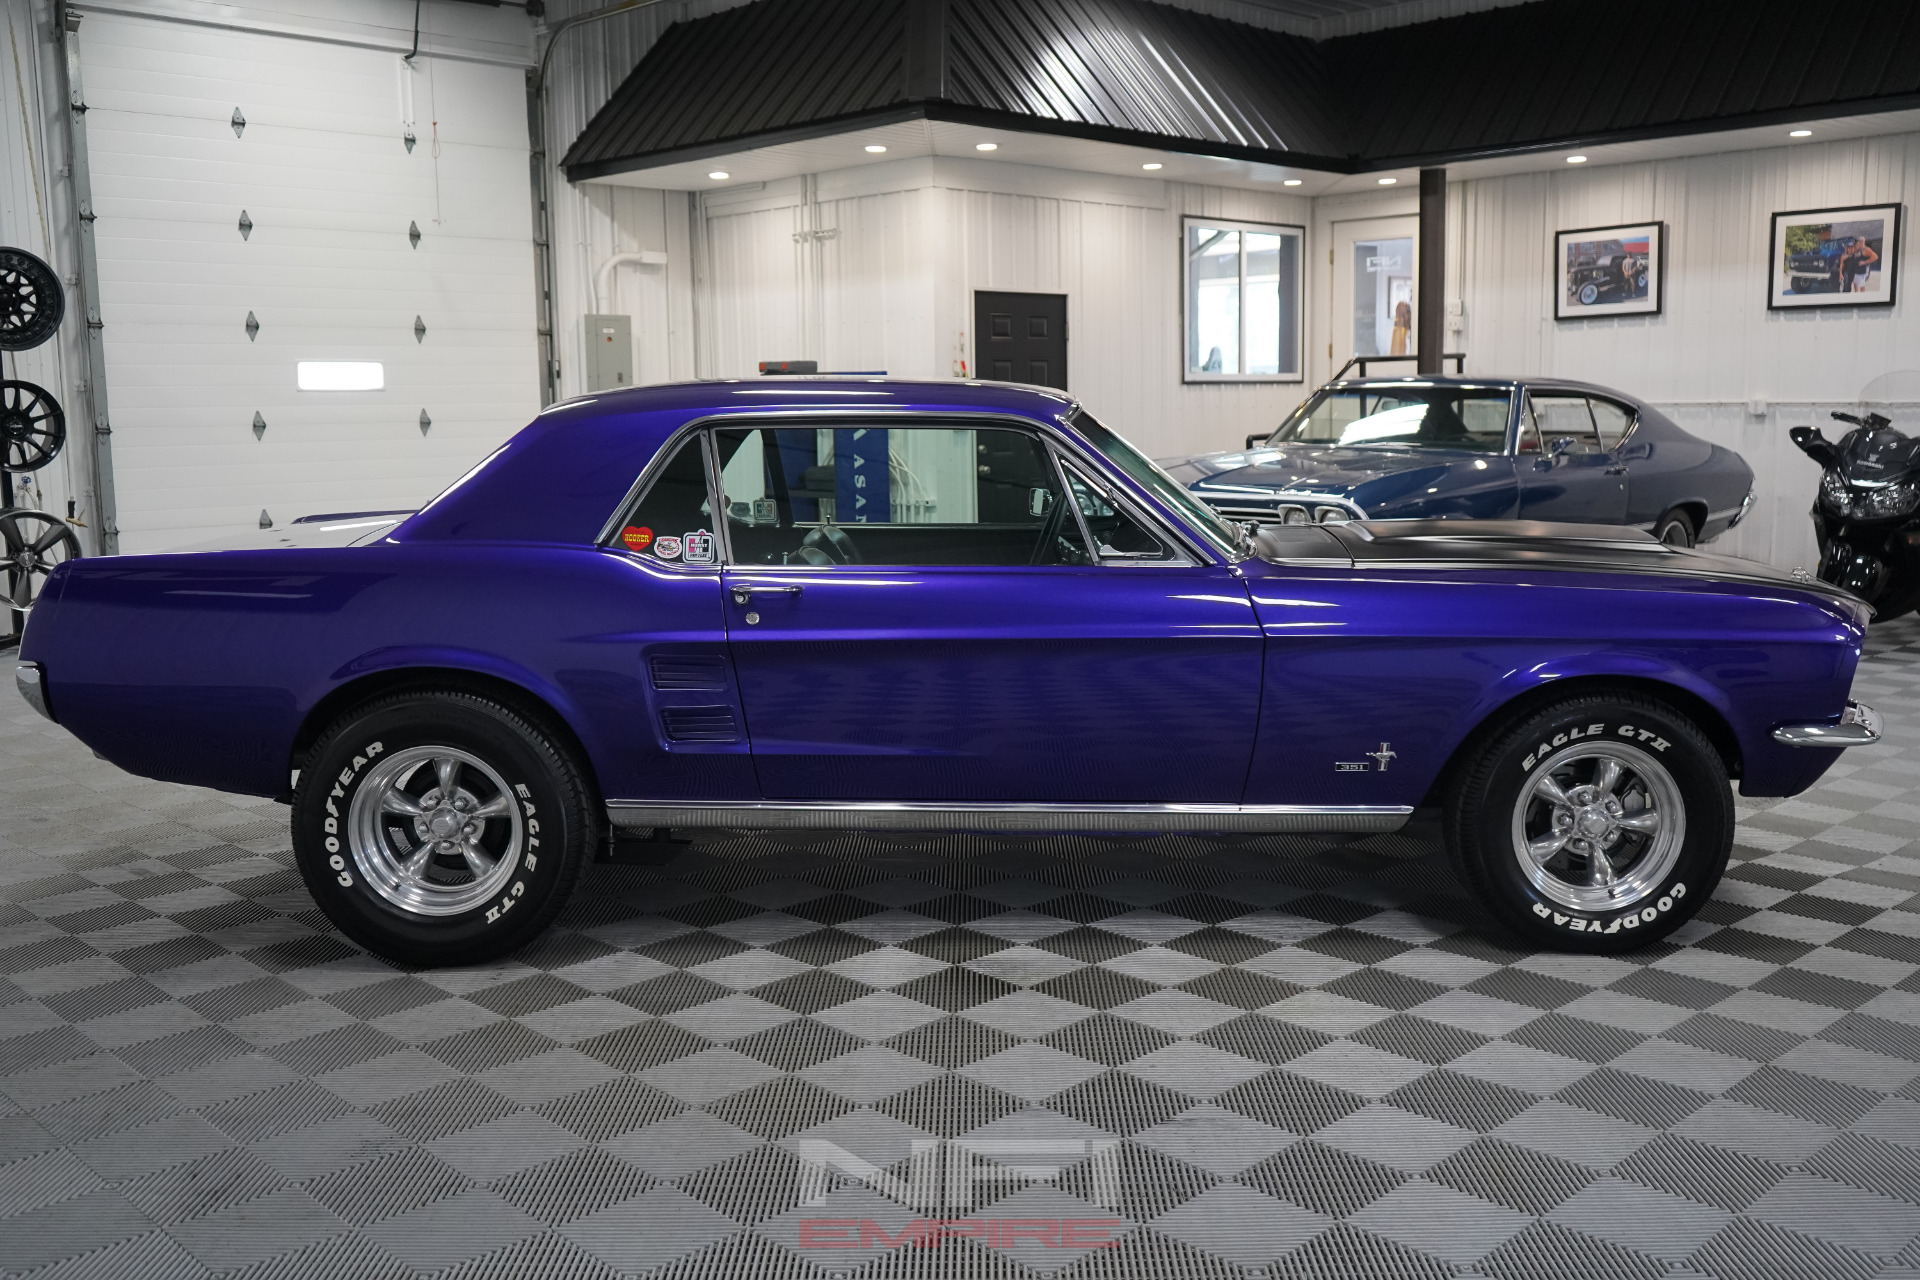 1967 Ford Mustang 7